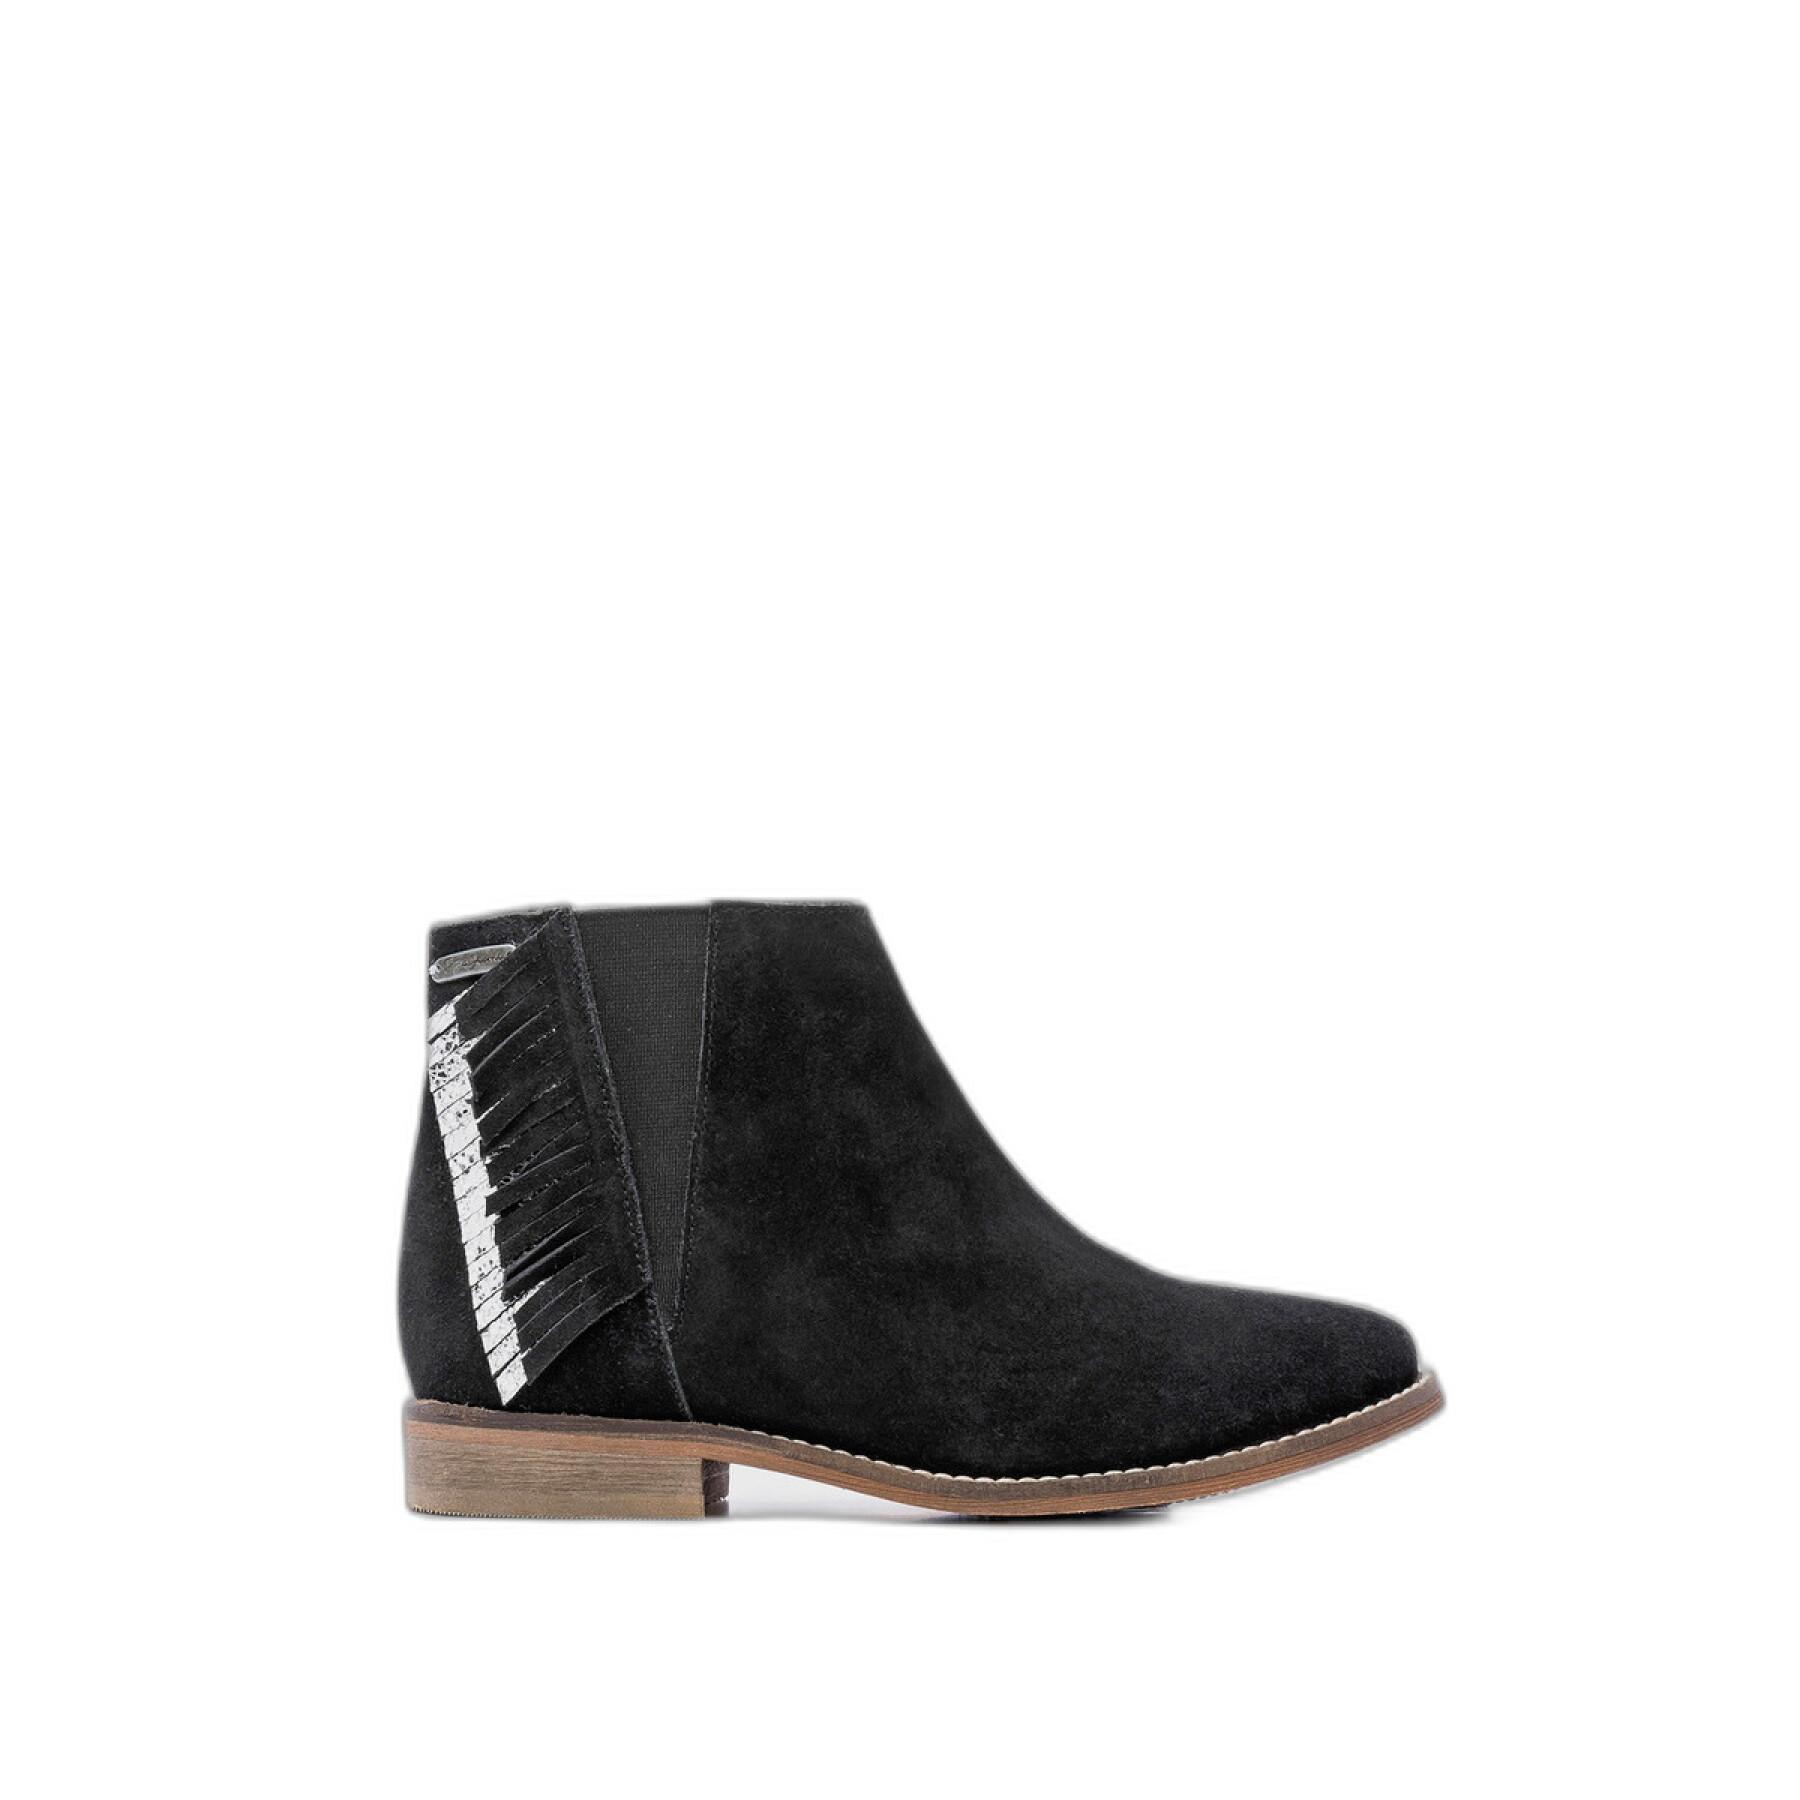 Girl's boots Pepe Jeans Nelly Fringes